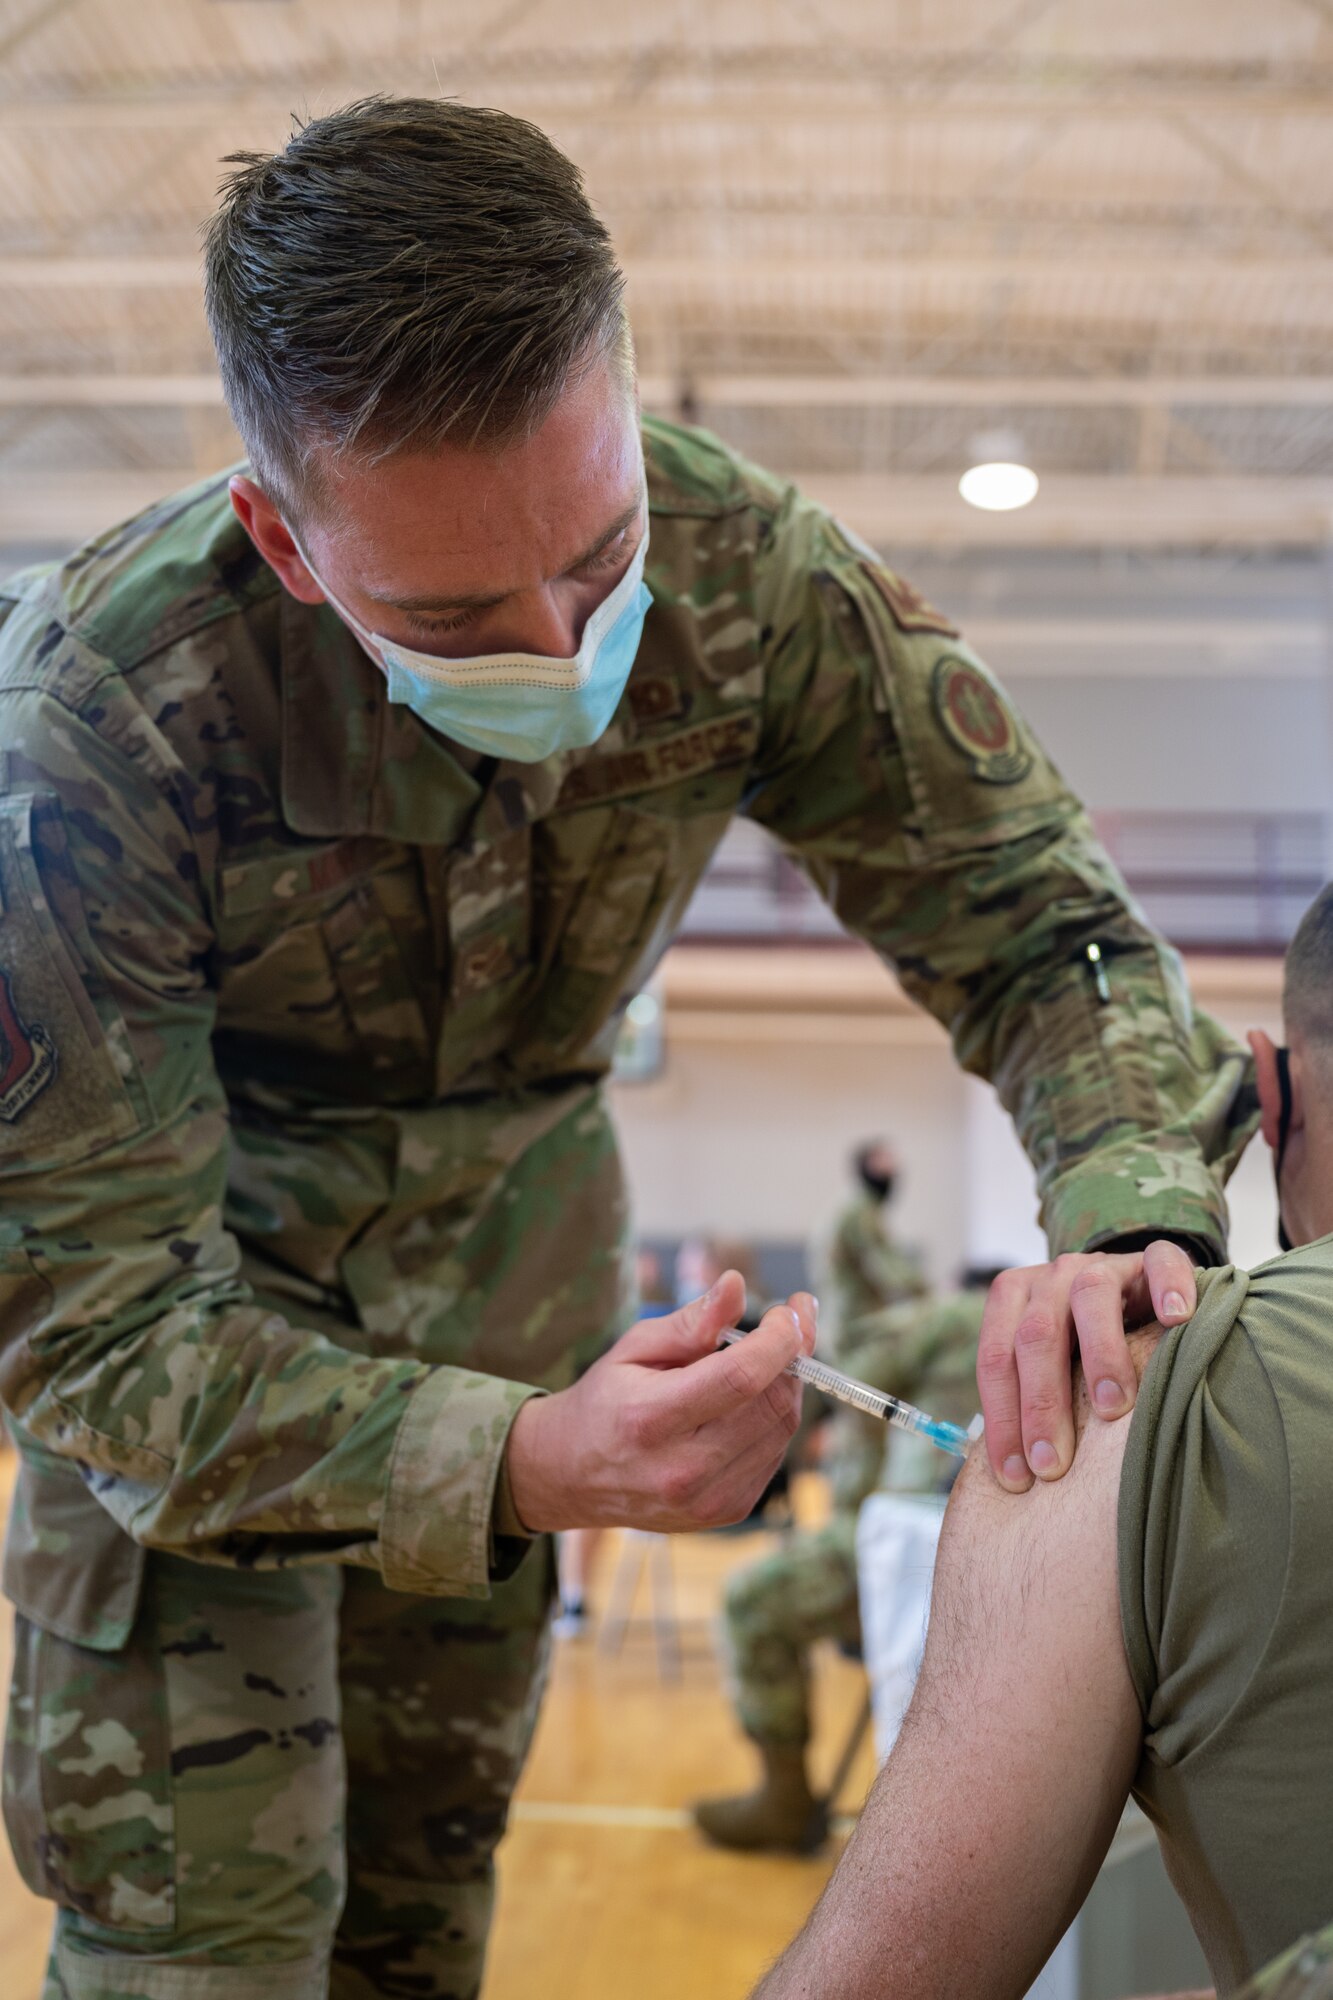 A man in a military uniform injects a syringe into the arm of a patient.